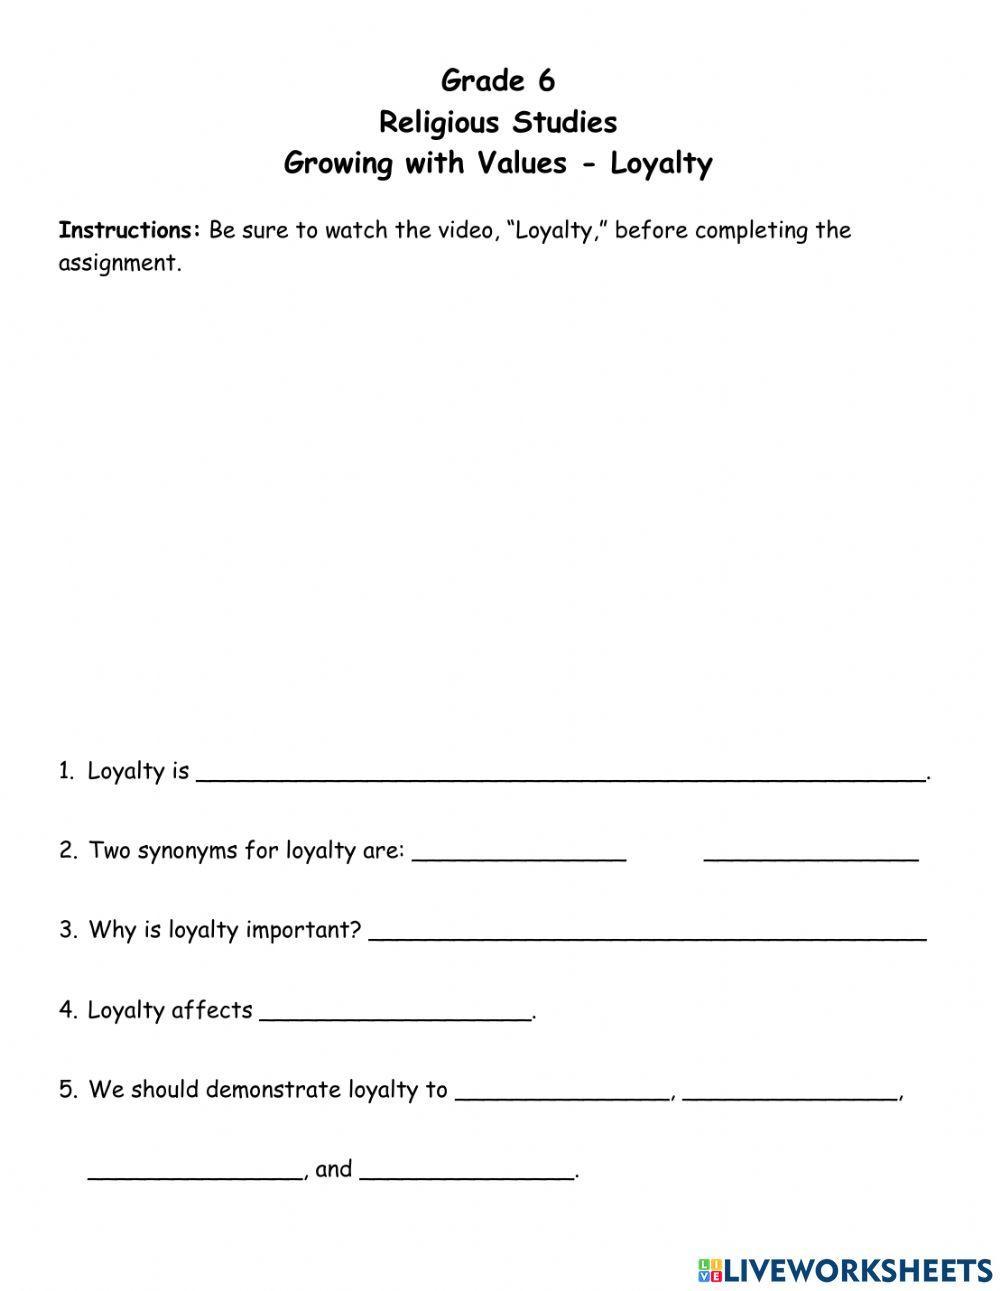 Growing with Values - Loyalty